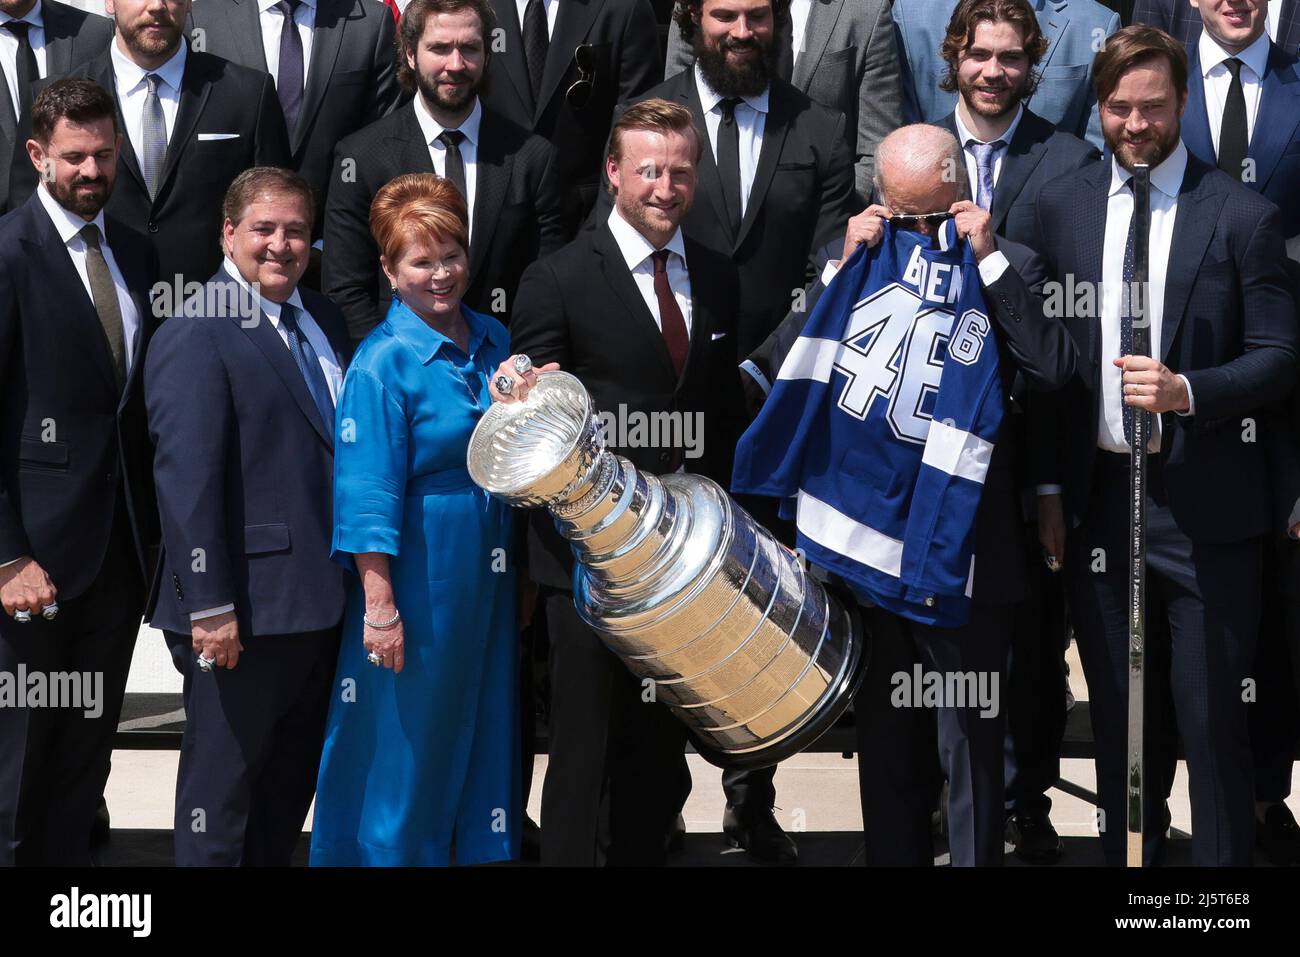 https://c8.alamy.com/comp/2J5T6E8/washington-usa-25th-apr-2022-us-president-joe-biden-holds-a-hockey-jersey-with-his-name-on-it-as-he-poses-next-to-the-stanley-cup-trophy-during-an-event-to-honor-the-2020-and-2021-stanley-cup-champions-tampa-bay-lightning-on-the-south-lawn-at-the-white-house-on-april-25-2022-in-washington-dc-photo-by-oliver-contrerassipa-usa-credit-sipa-usaalamy-live-news-2J5T6E8.jpg